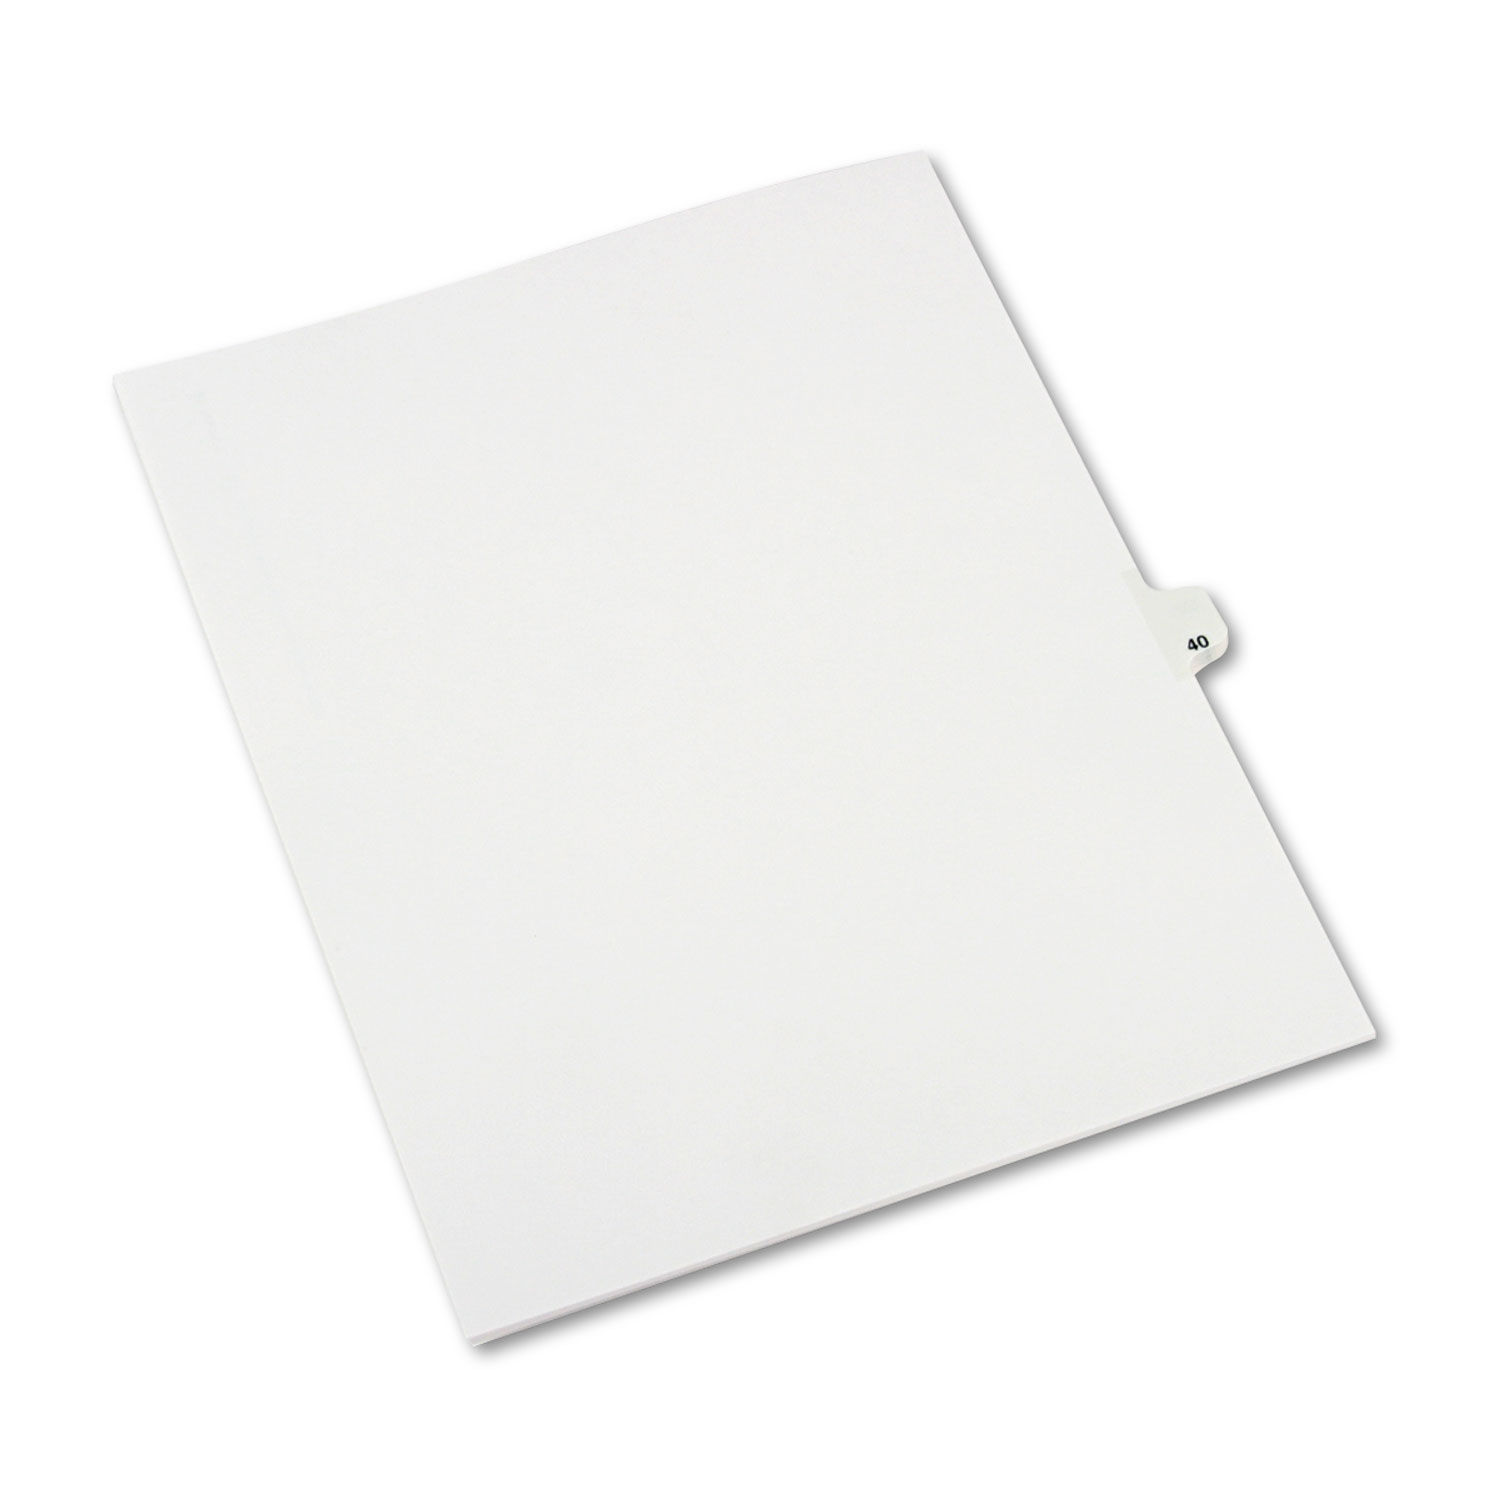  Avery 01040 Preprinted Legal Exhibit Side Tab Index Dividers, Avery Style, 10-Tab, 40, 11 x 8.5, White, 25/Pack (AVE01040) 